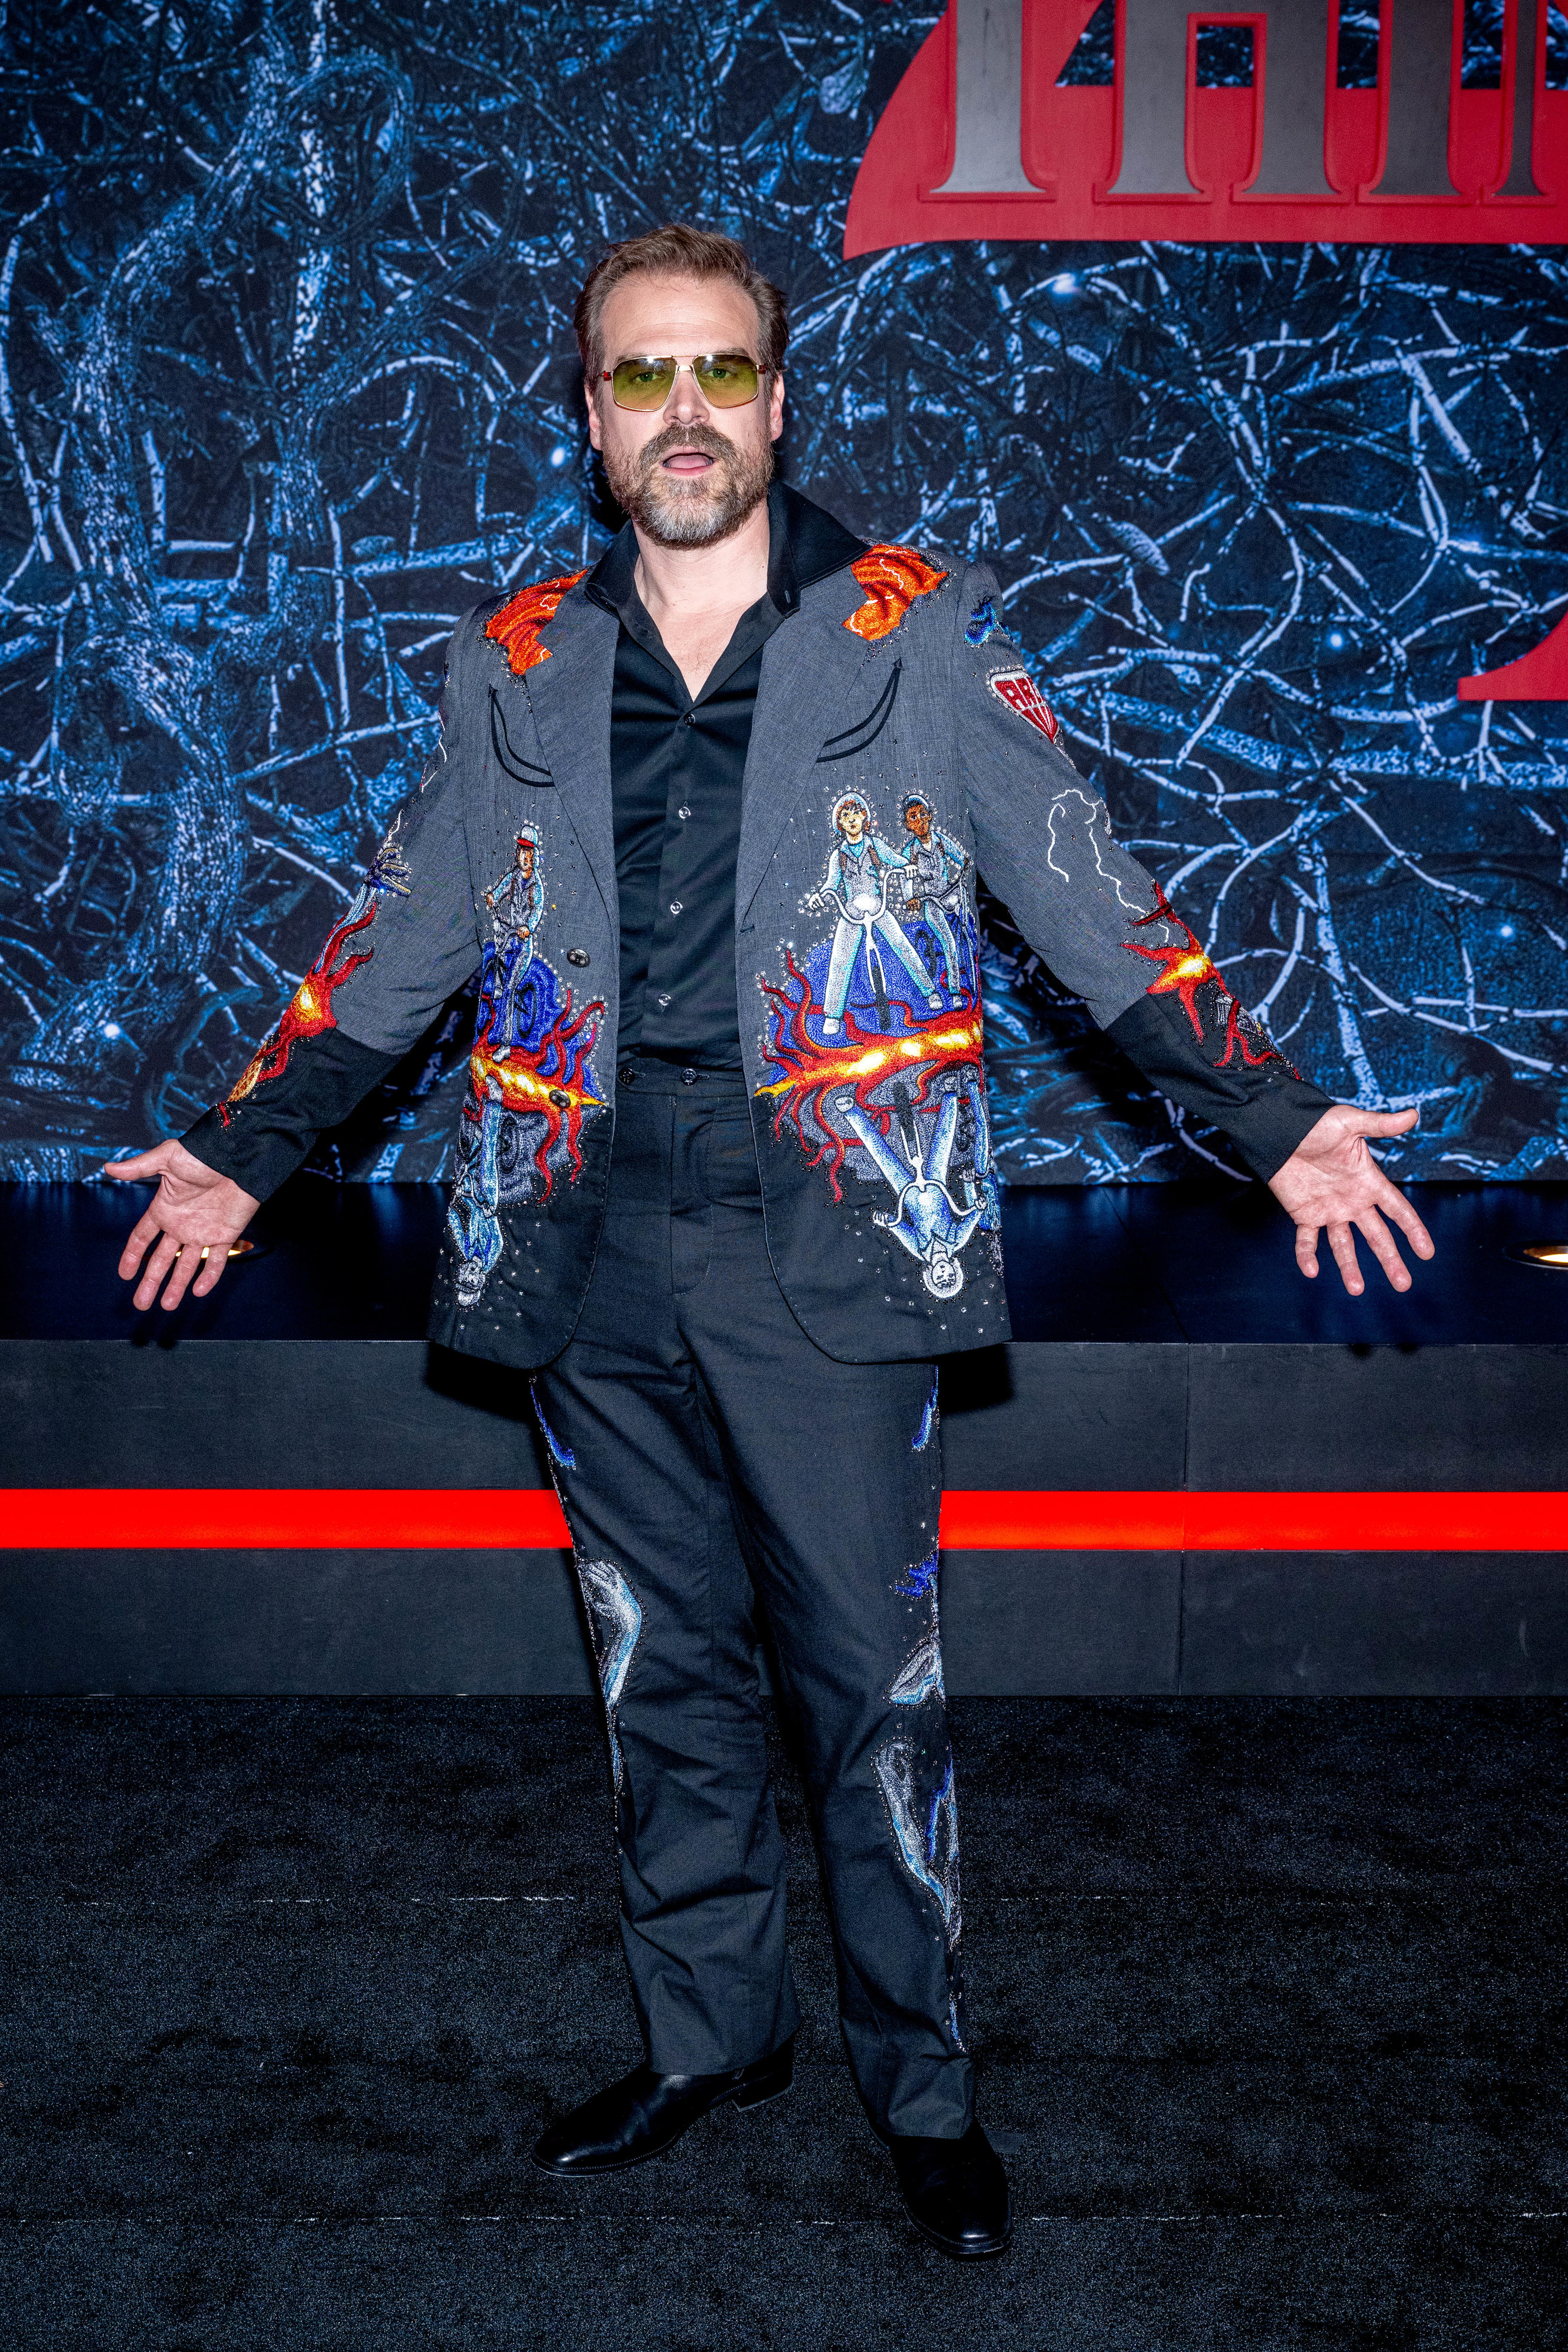 David in a wildly different outfit; this time, it&#x27;s a custom suit colorfully emblazoned with images from Stranger Things